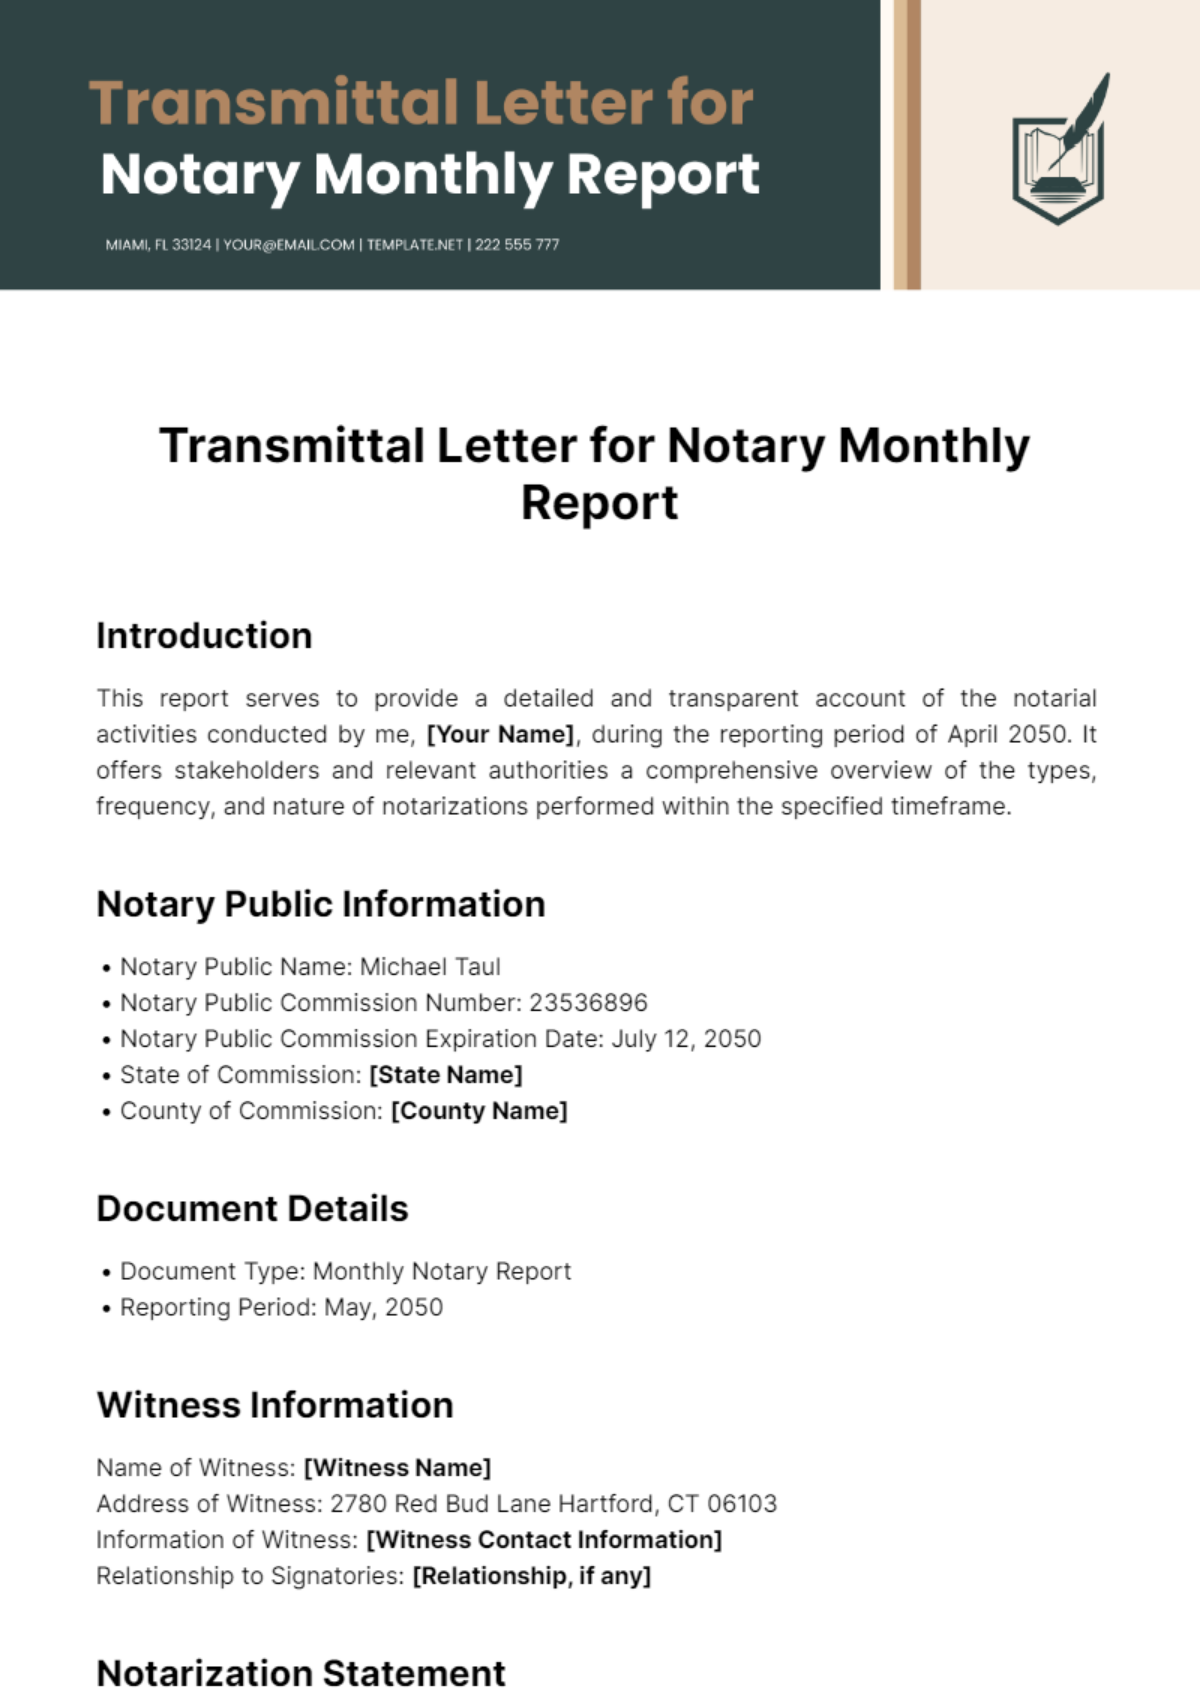  Transmittal Letter for Notary Monthly Report Template